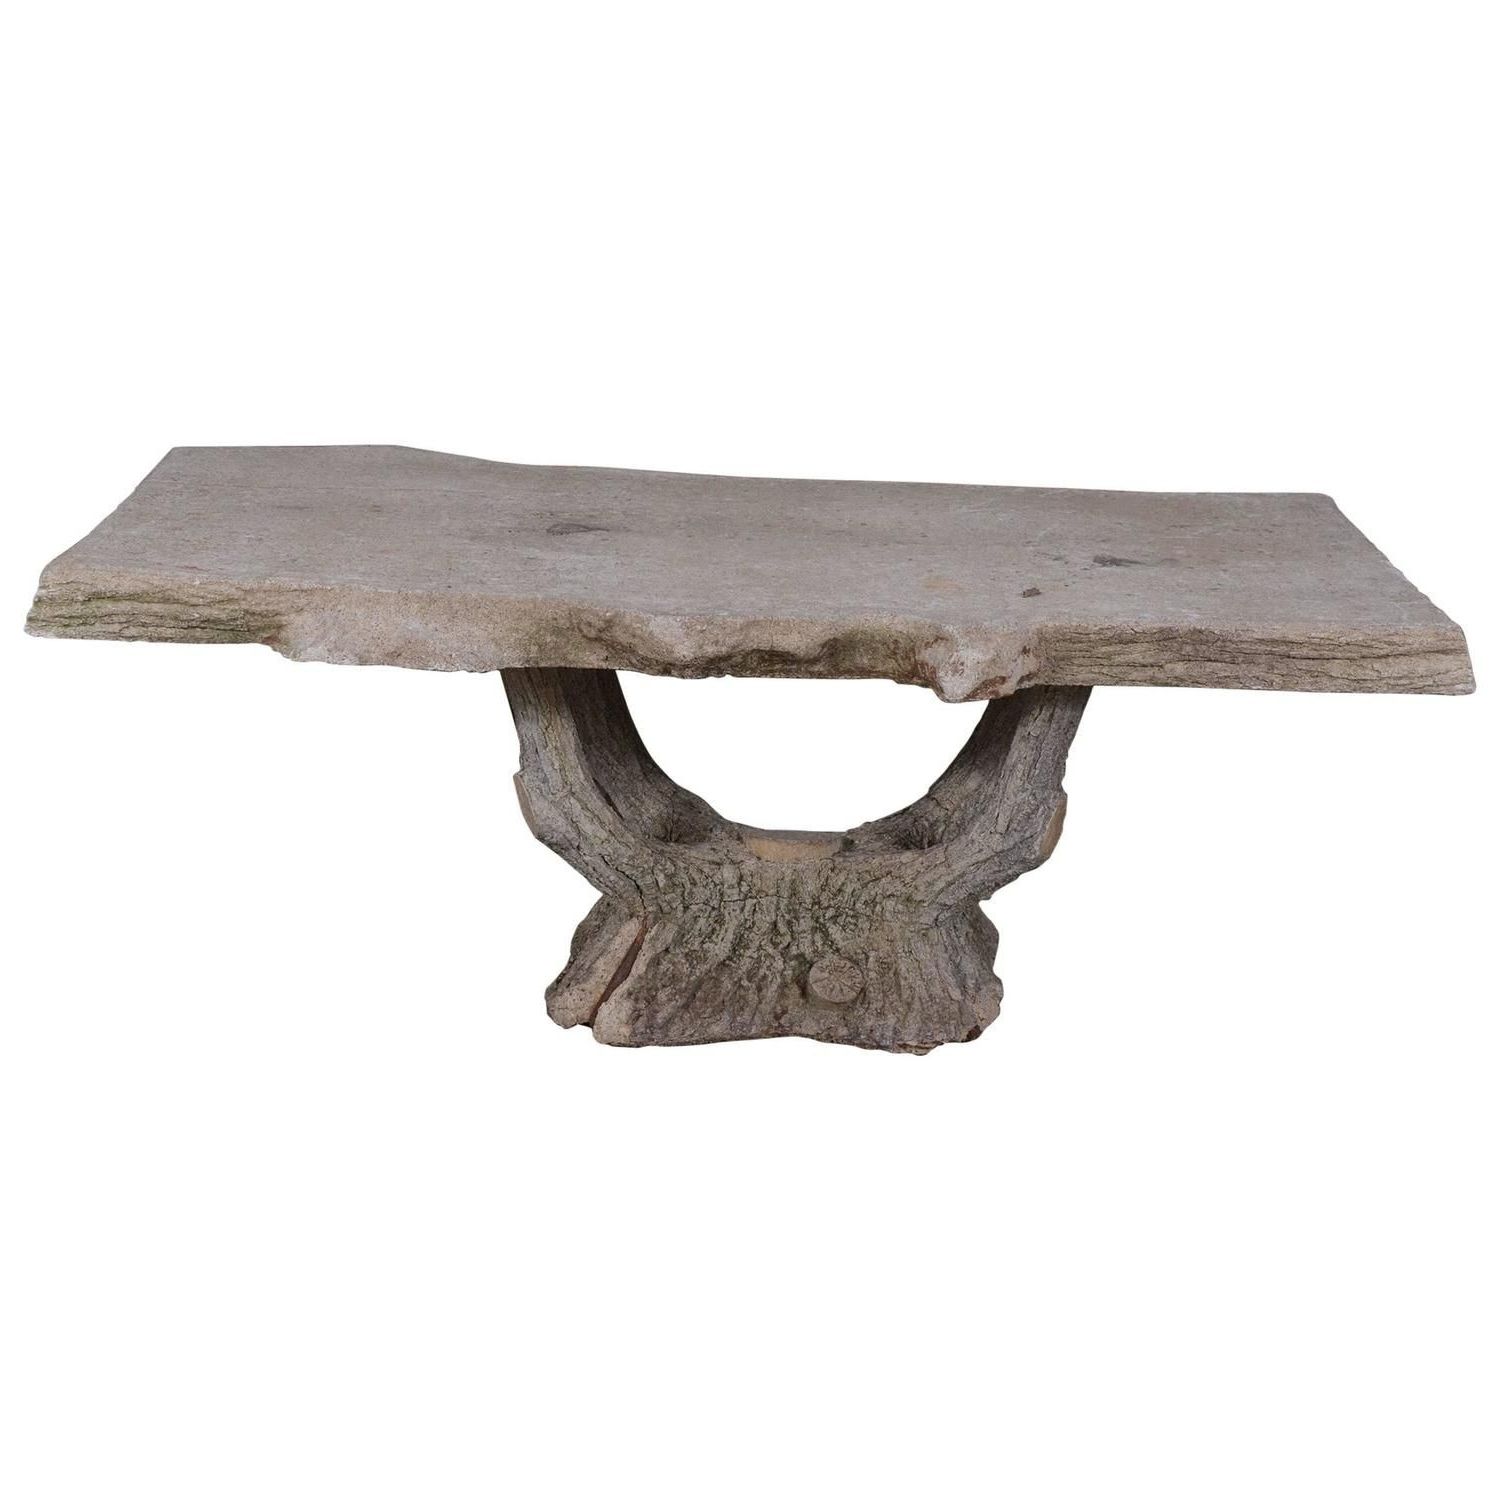 Cement Coffee Table New French Faux Bois Table From The S – Www With Favorite Faux Bois Coffee Tables (View 11 of 20)